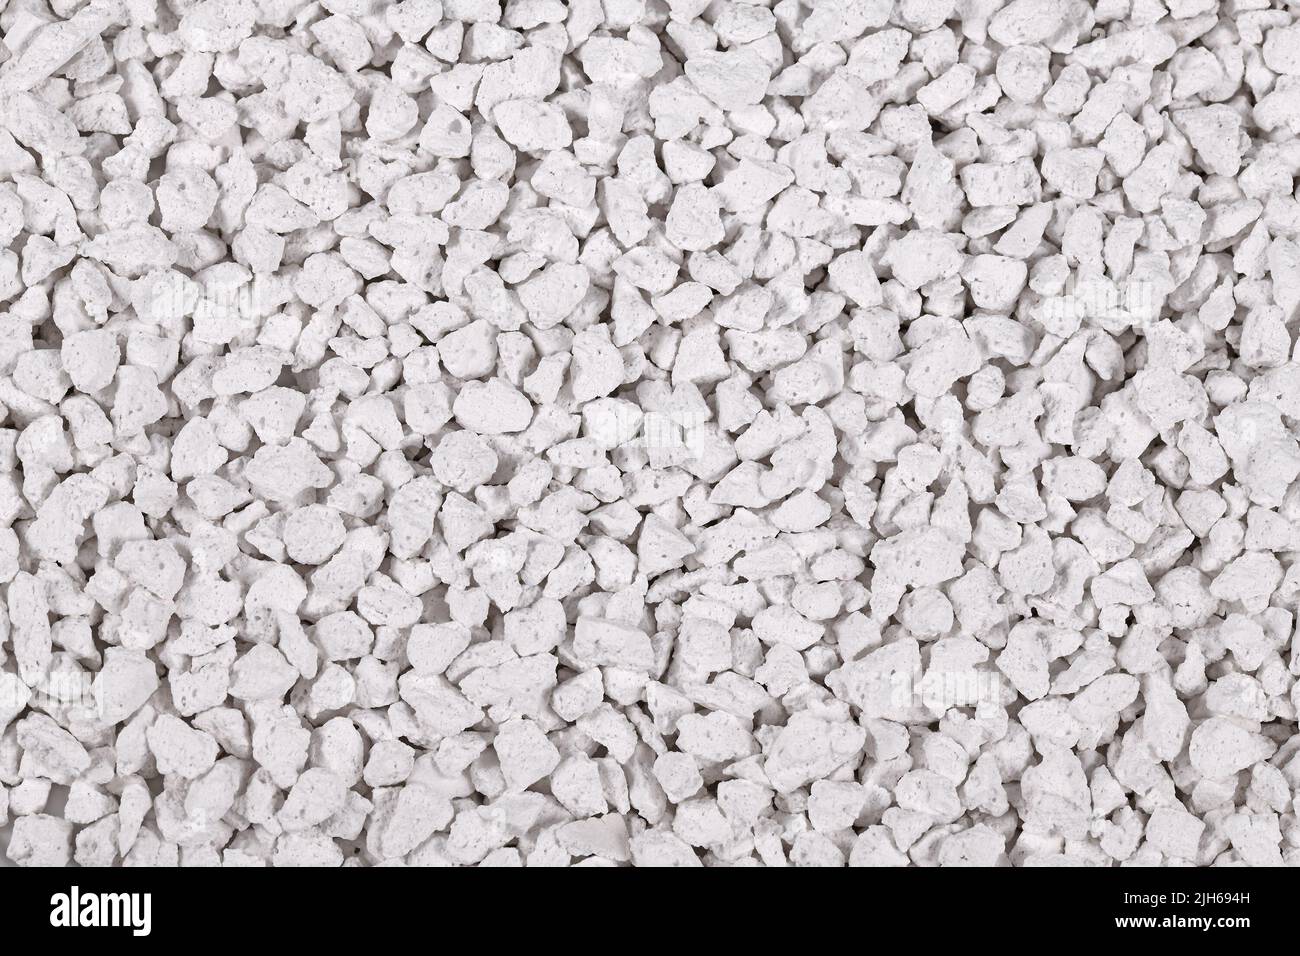 Close up of white cat litter Stock Photo